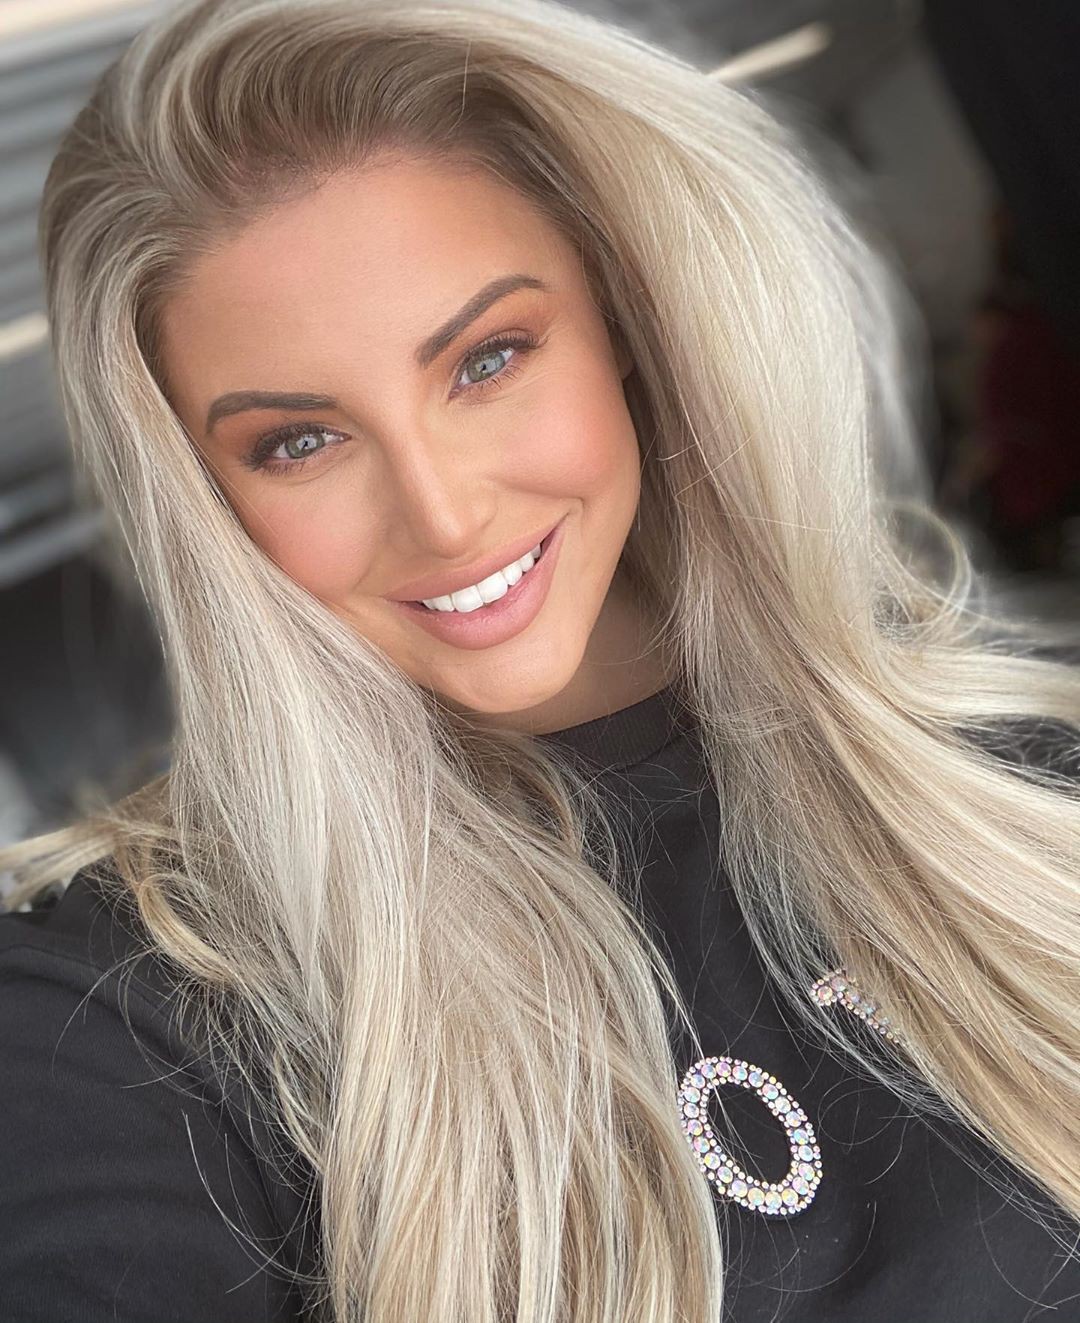 Ashley Alexiss blond hairs pic, Beautiful And Cute Girls, Natural ...